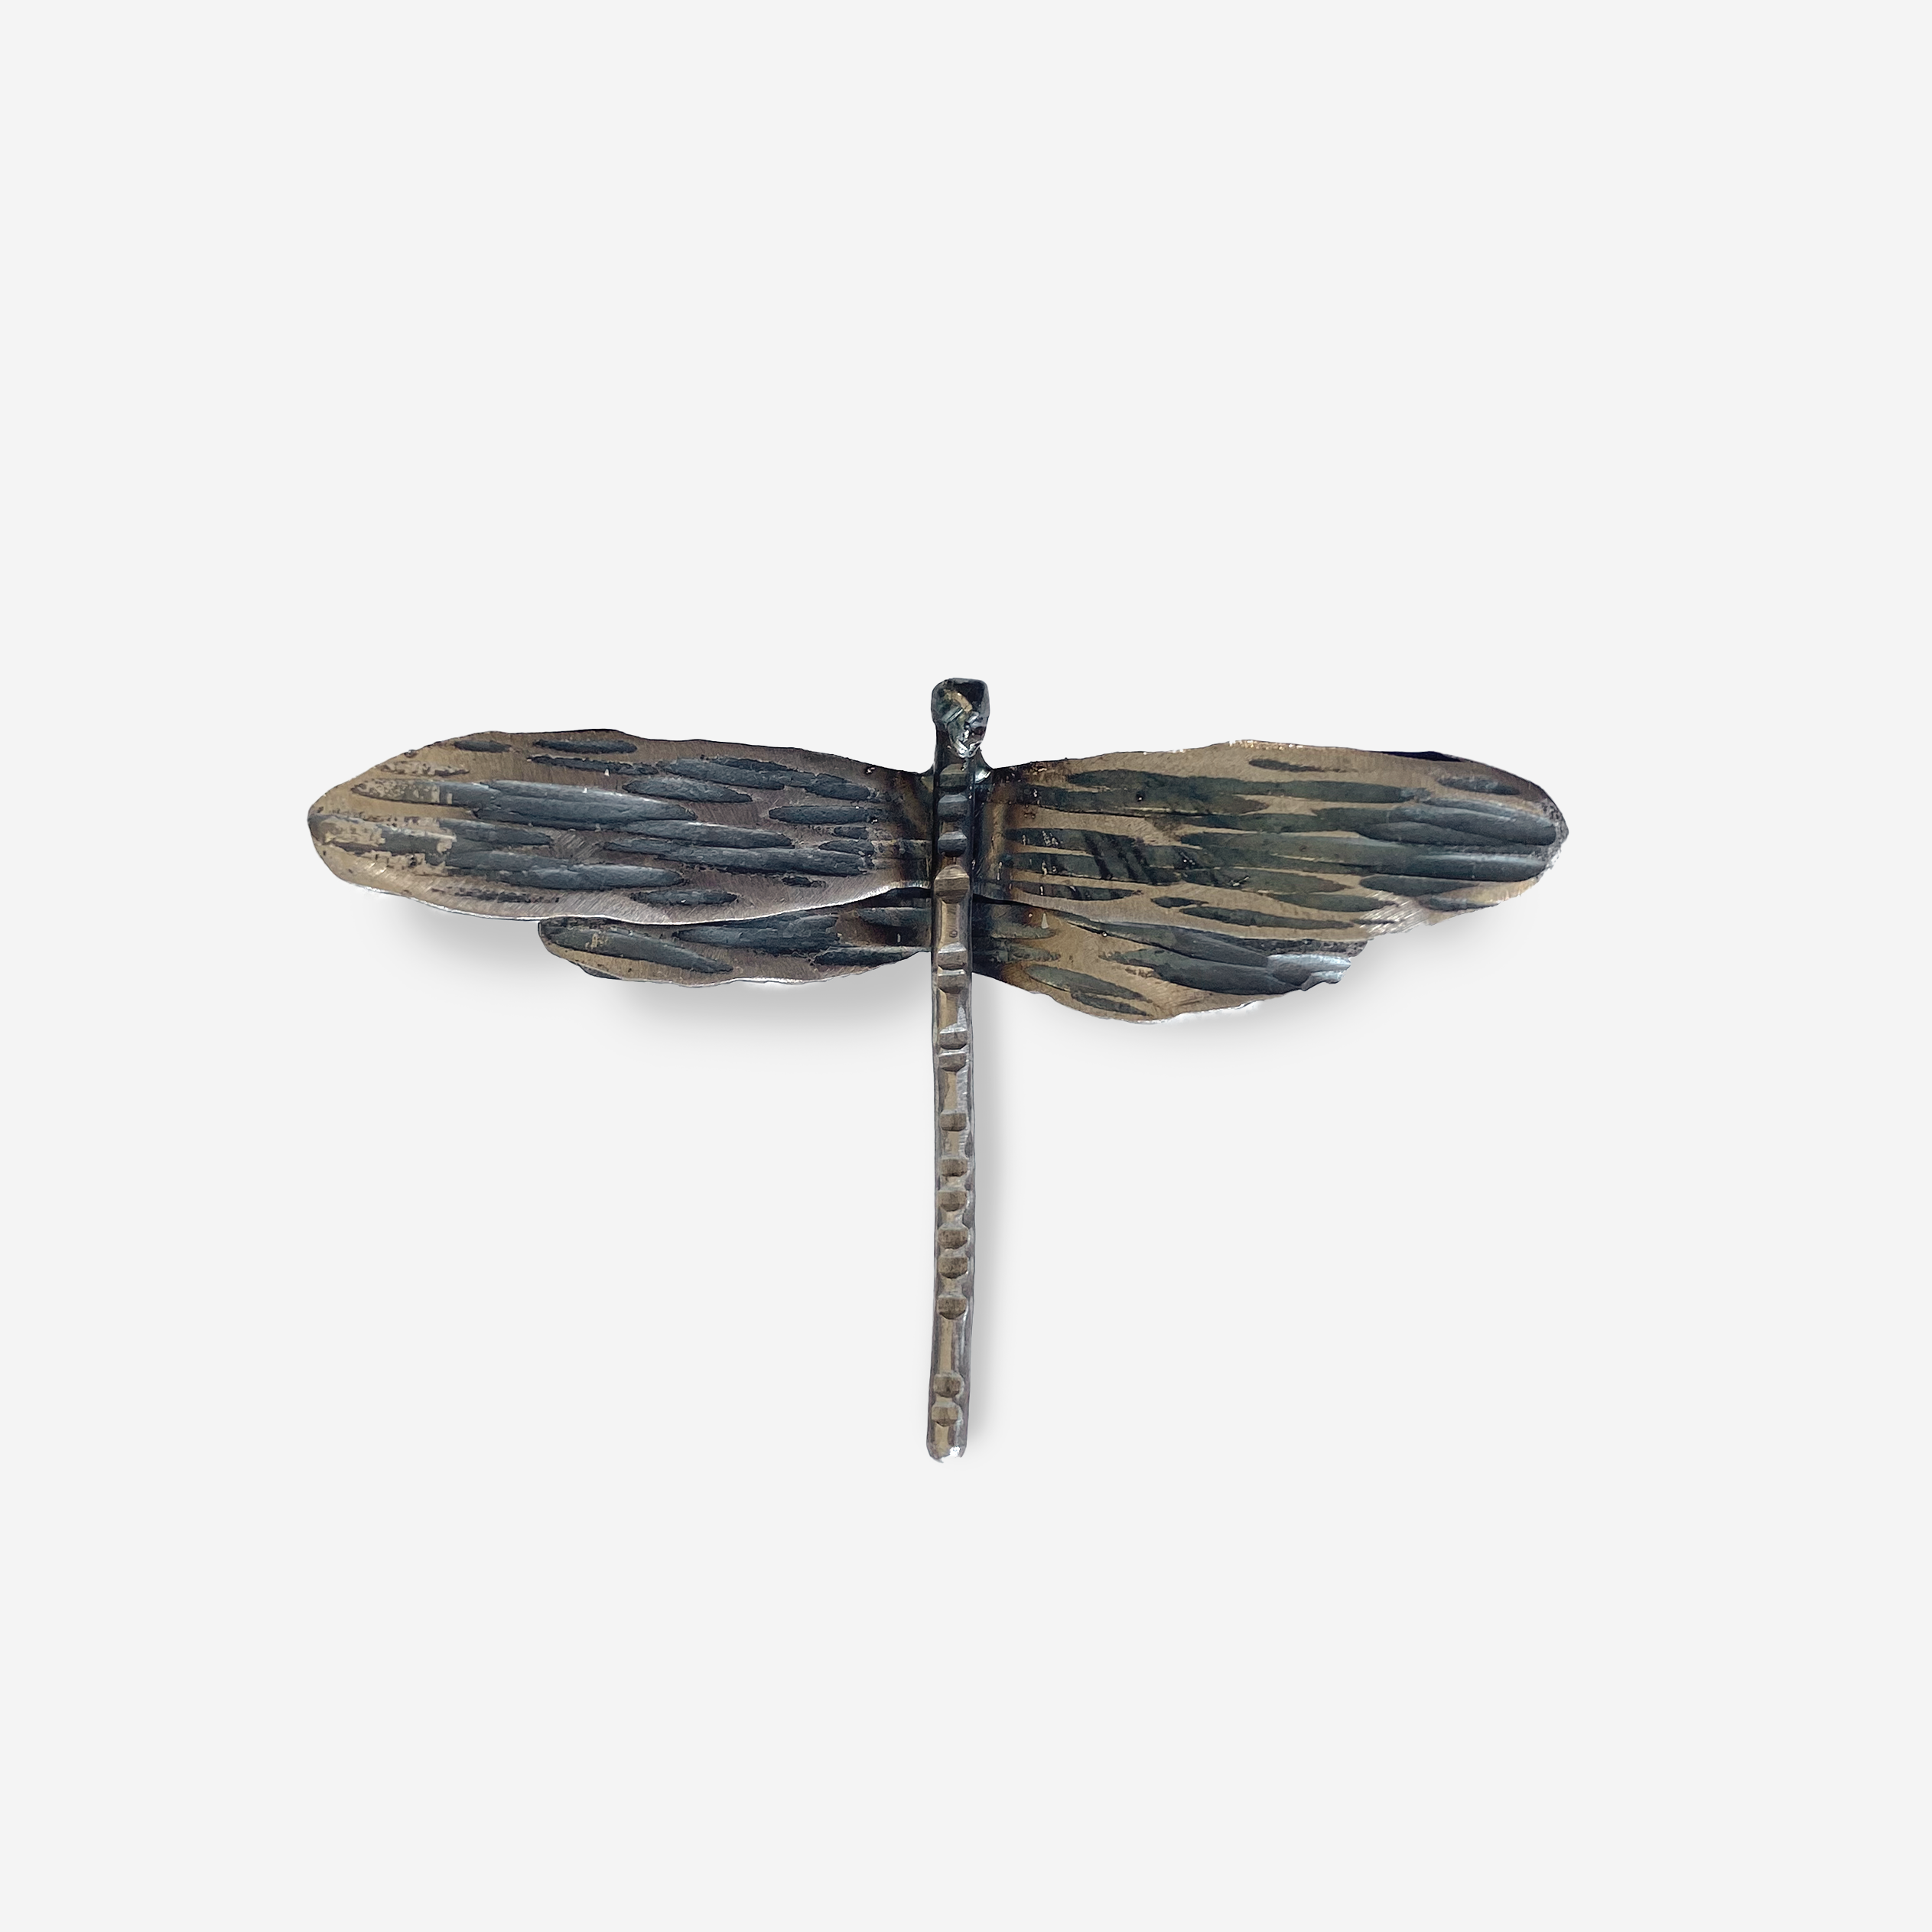 Dragonfly Wall Sculptures